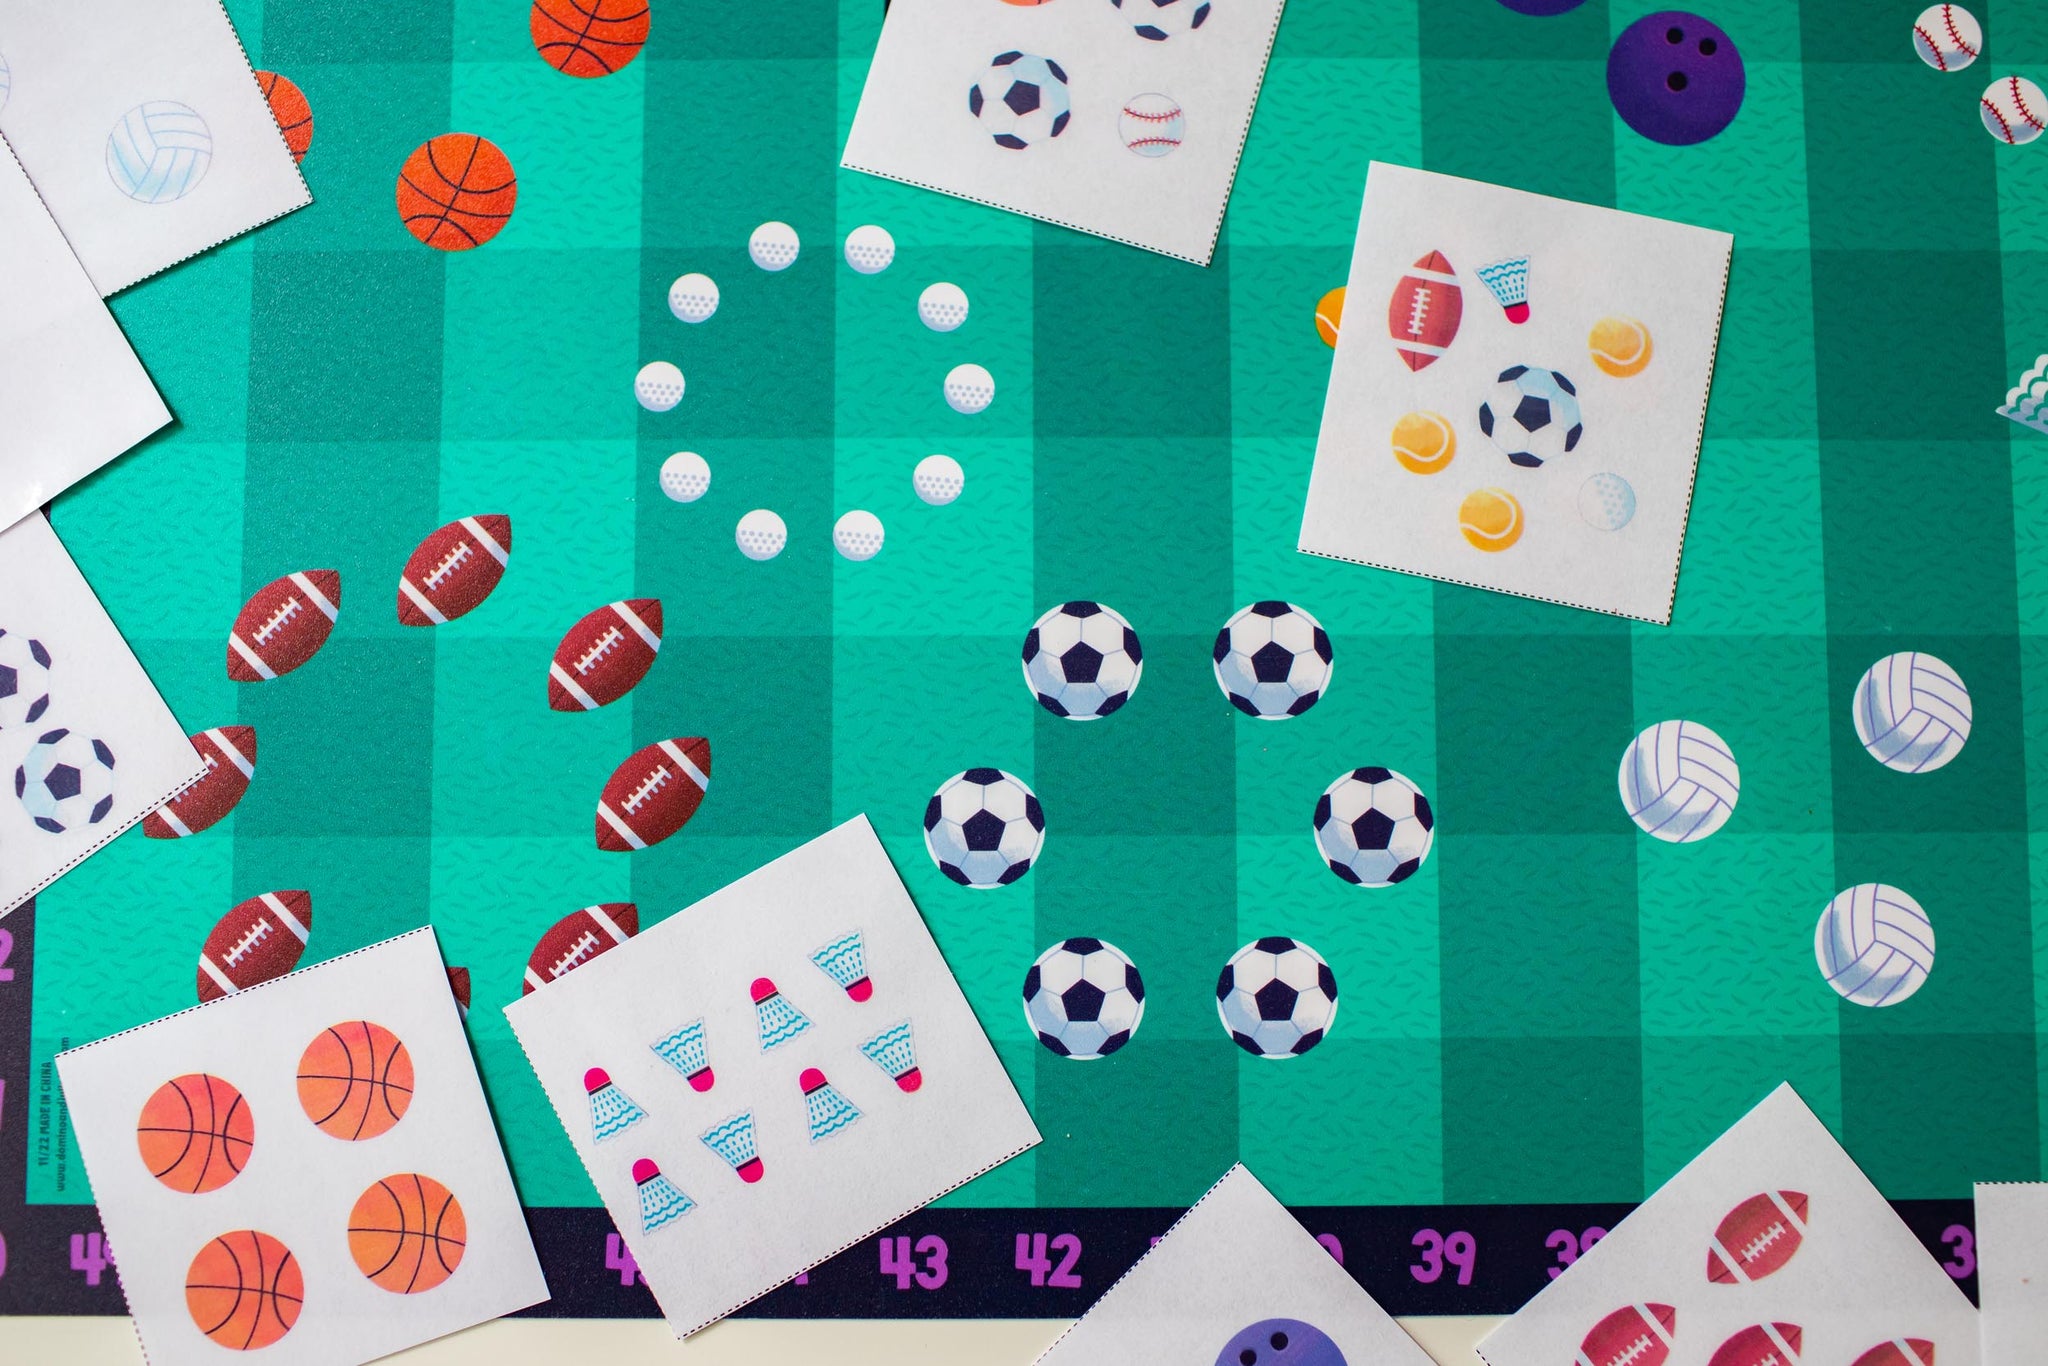 Counting Placemat, Counting Placemats, Math Placemat, Math Placemats, Counting Placemat for Sports Fans, Colorful Sports Ball Theme with Counting Numbers, developing essential math skills, math activity ideas